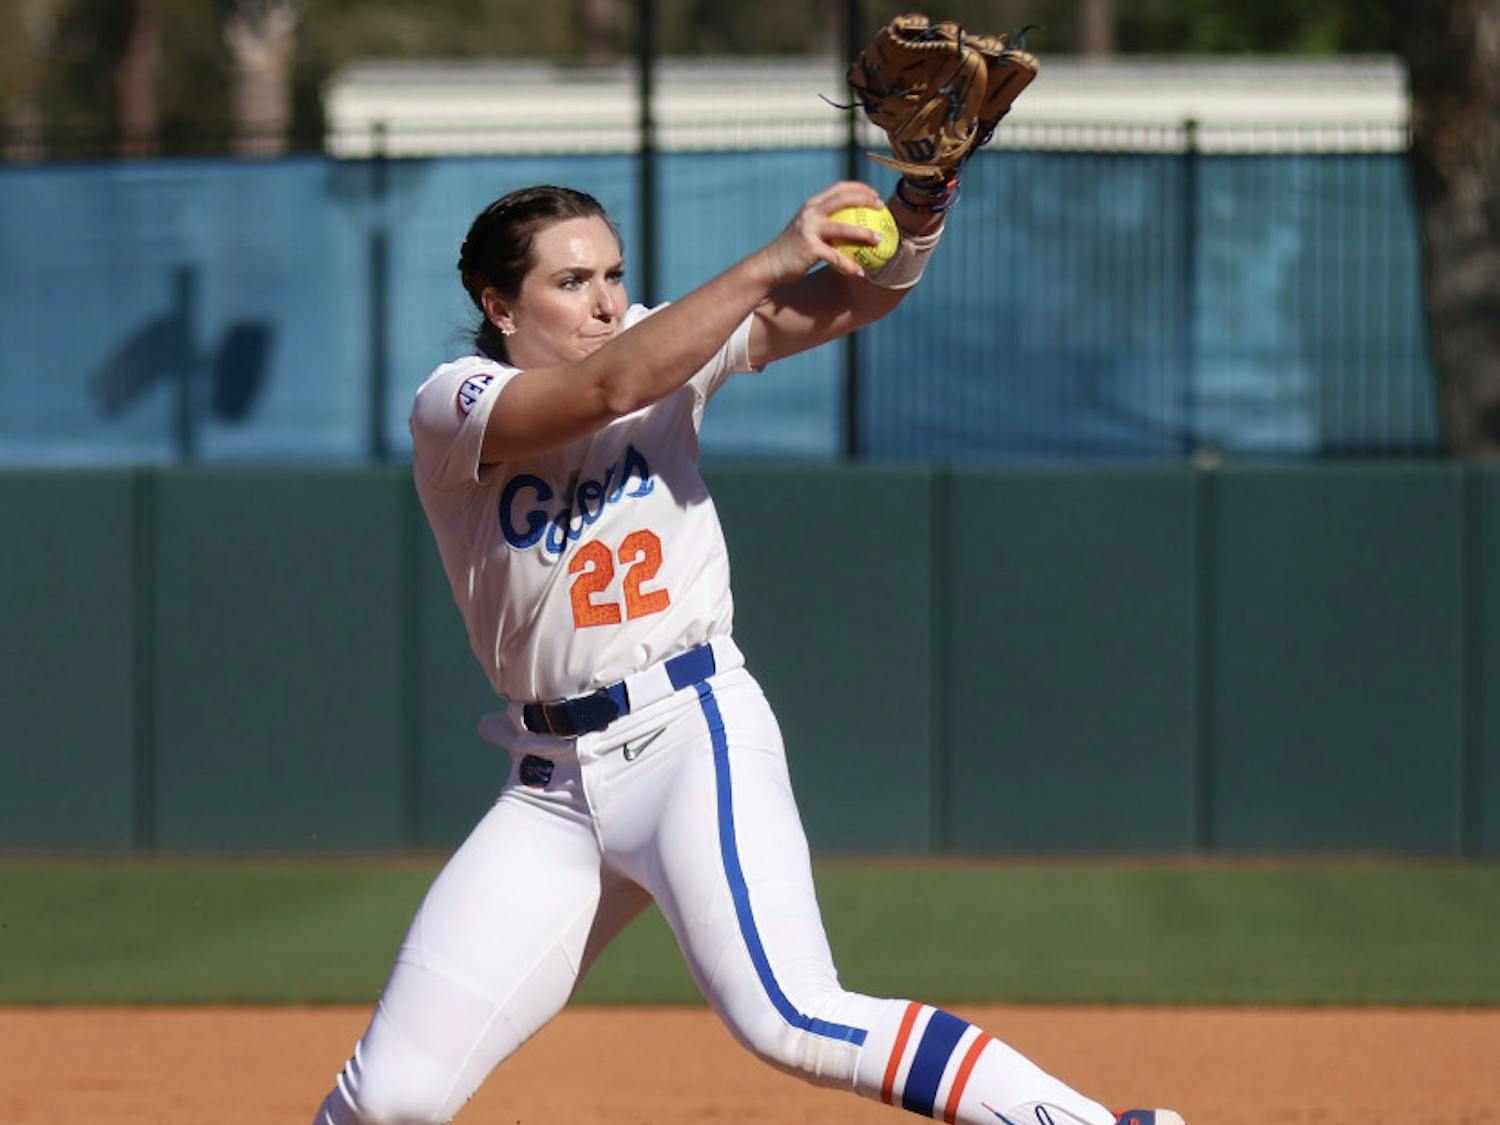 Elizabeth Hightower winds up in the pitcher’s circle against FSU March 3. Hightower earned her first win of the season Friday after a dominant relief appearance.